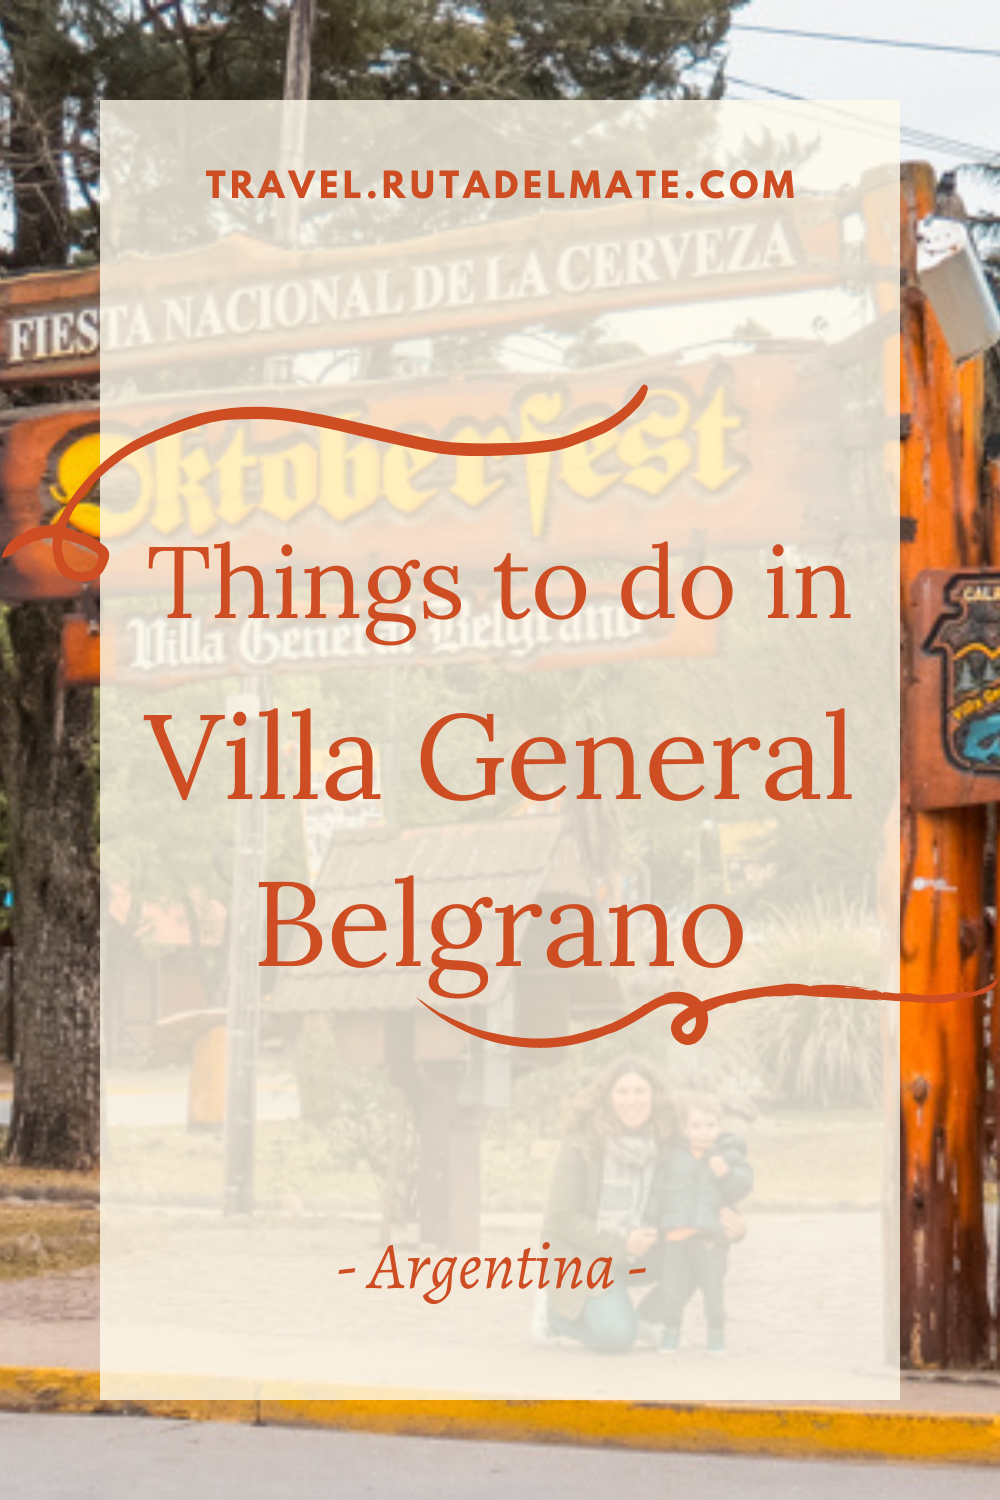 Things to do in Villa General Belgrano and surroundings